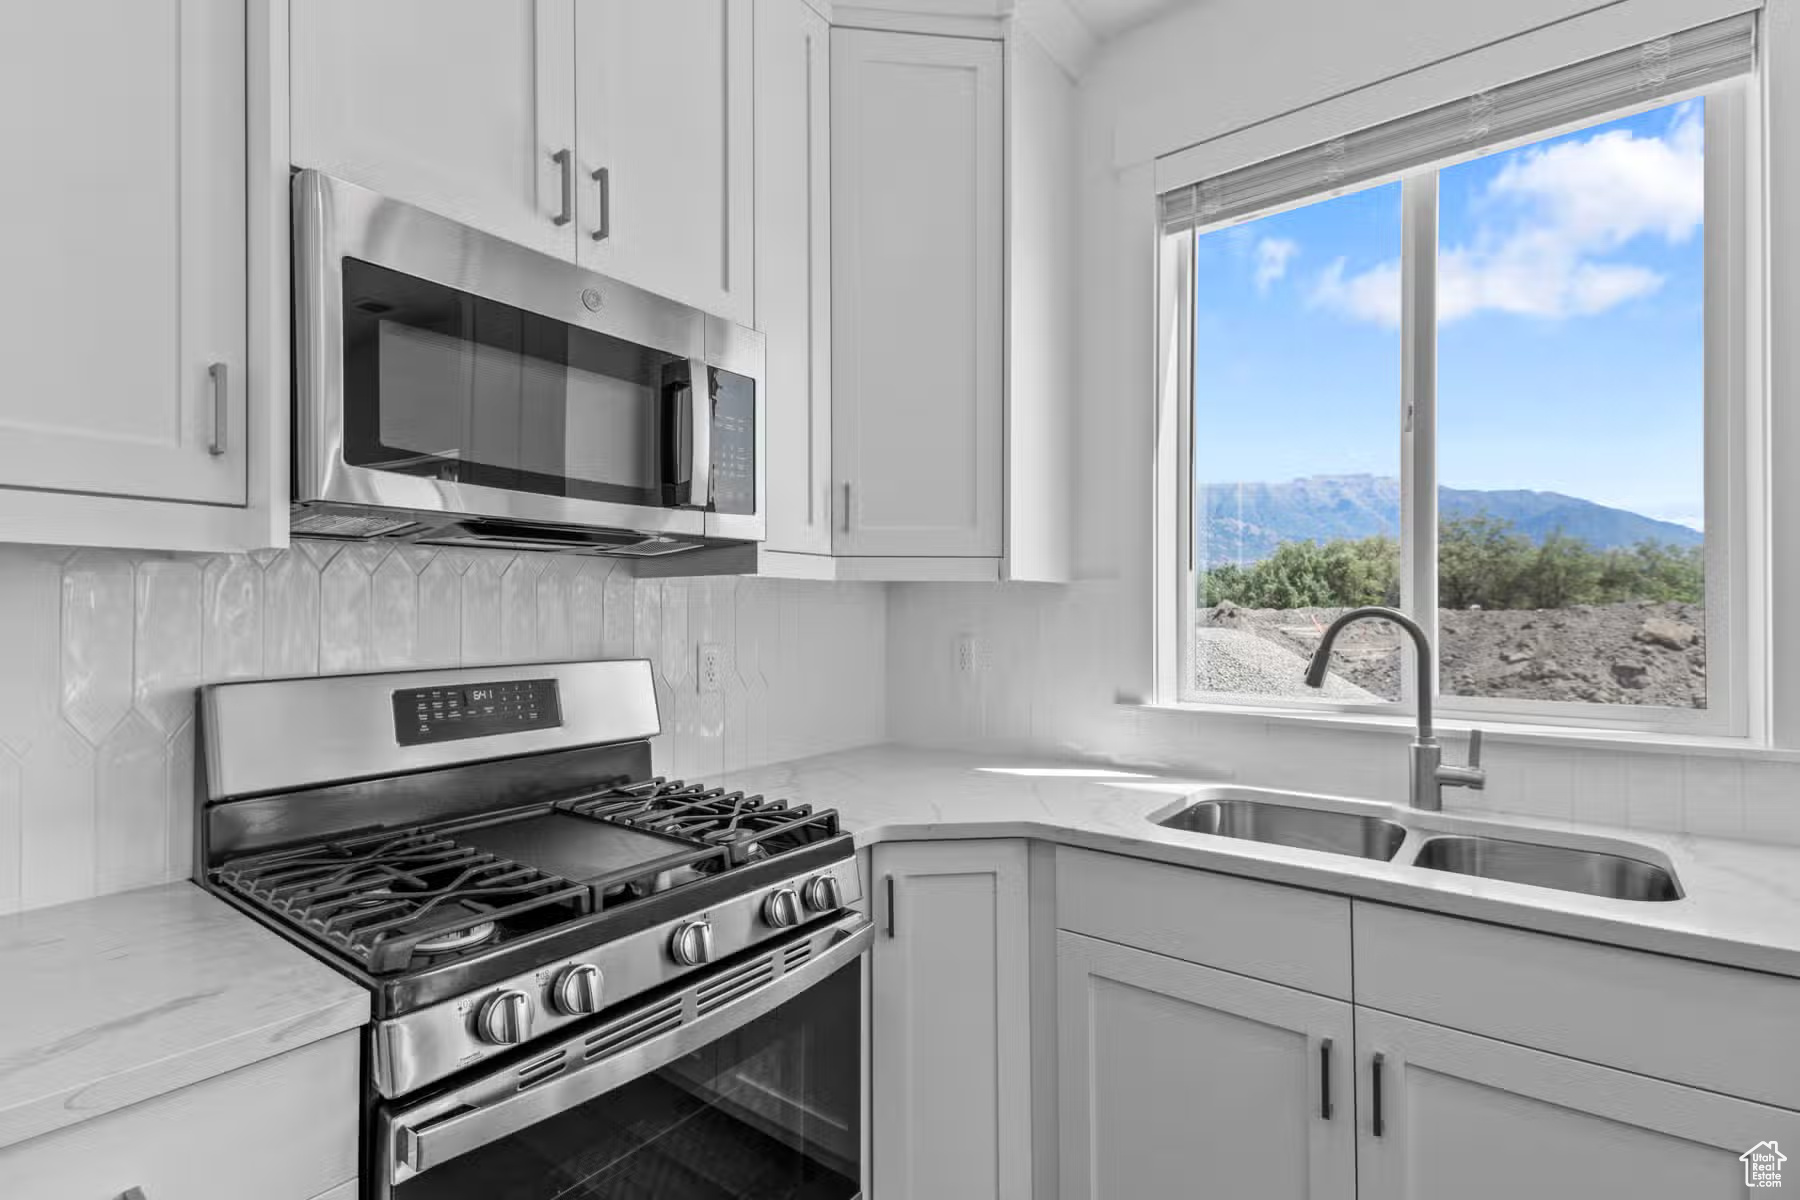 Kitchen with light stone countertops, appliances with stainless steel finishes, white cabinets, sink, and a mountain view